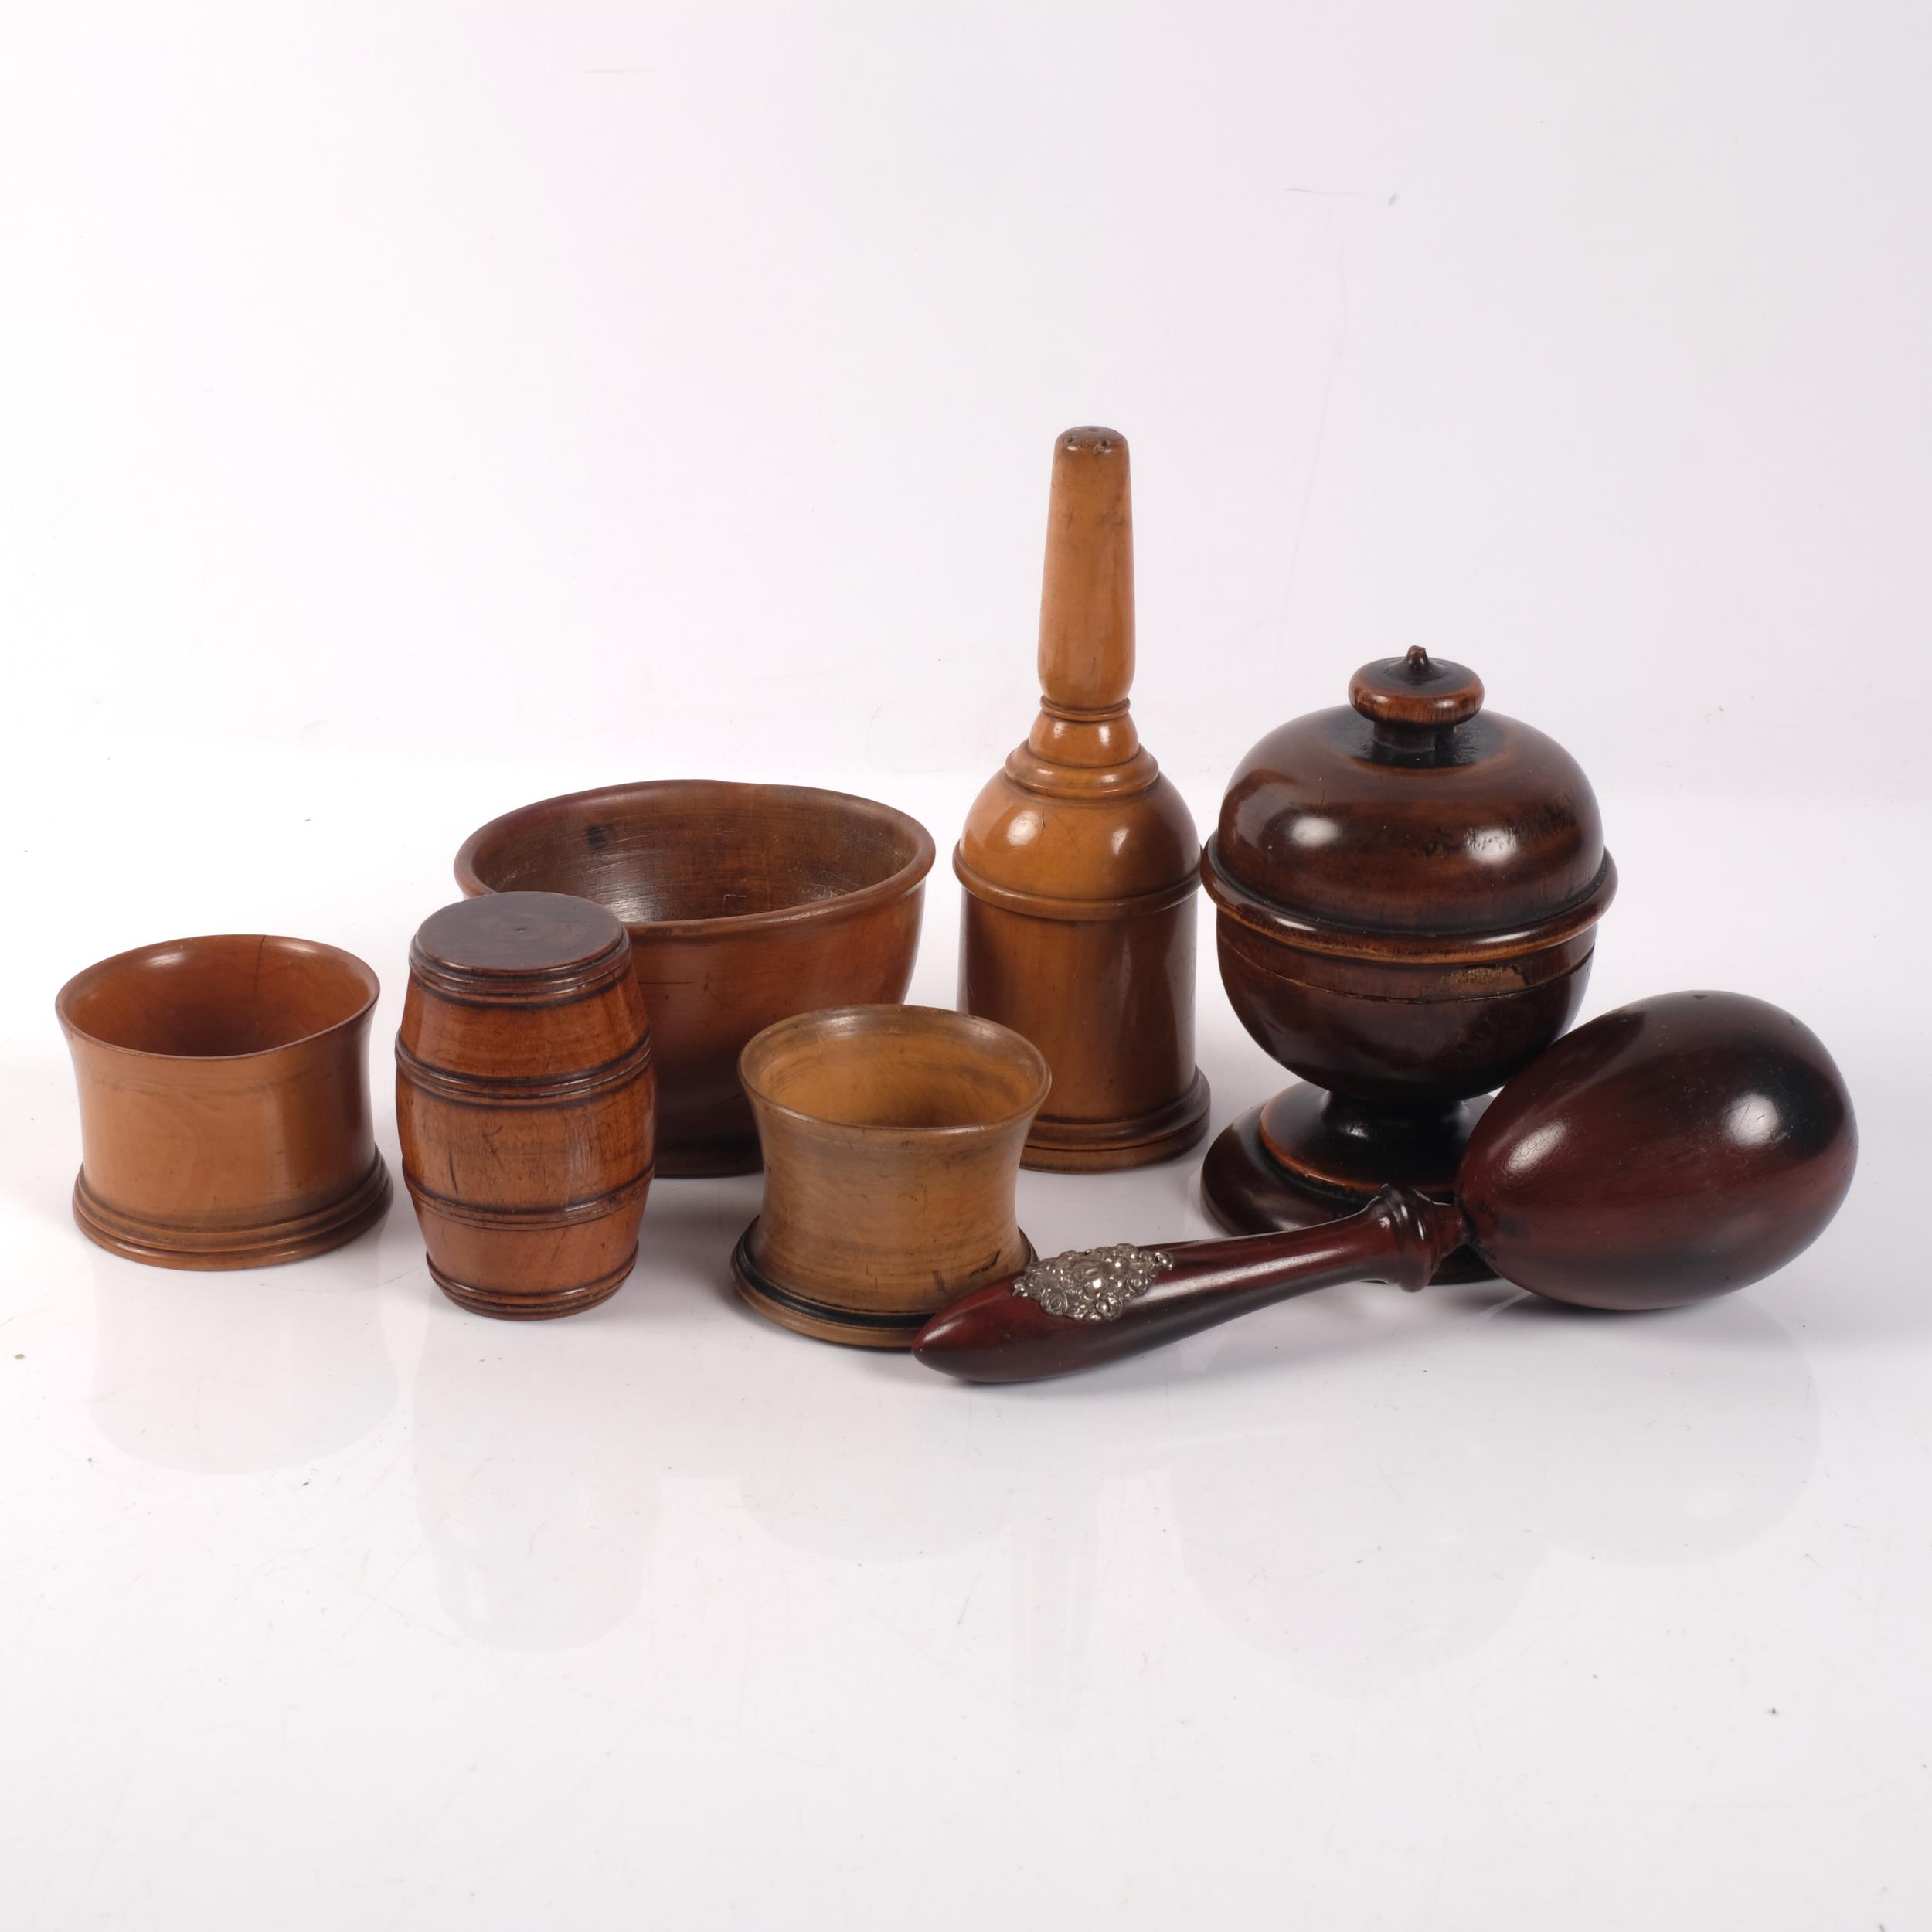 A group of Antique treen items, including a string box, a silver-mounted pestle, a wig powderer